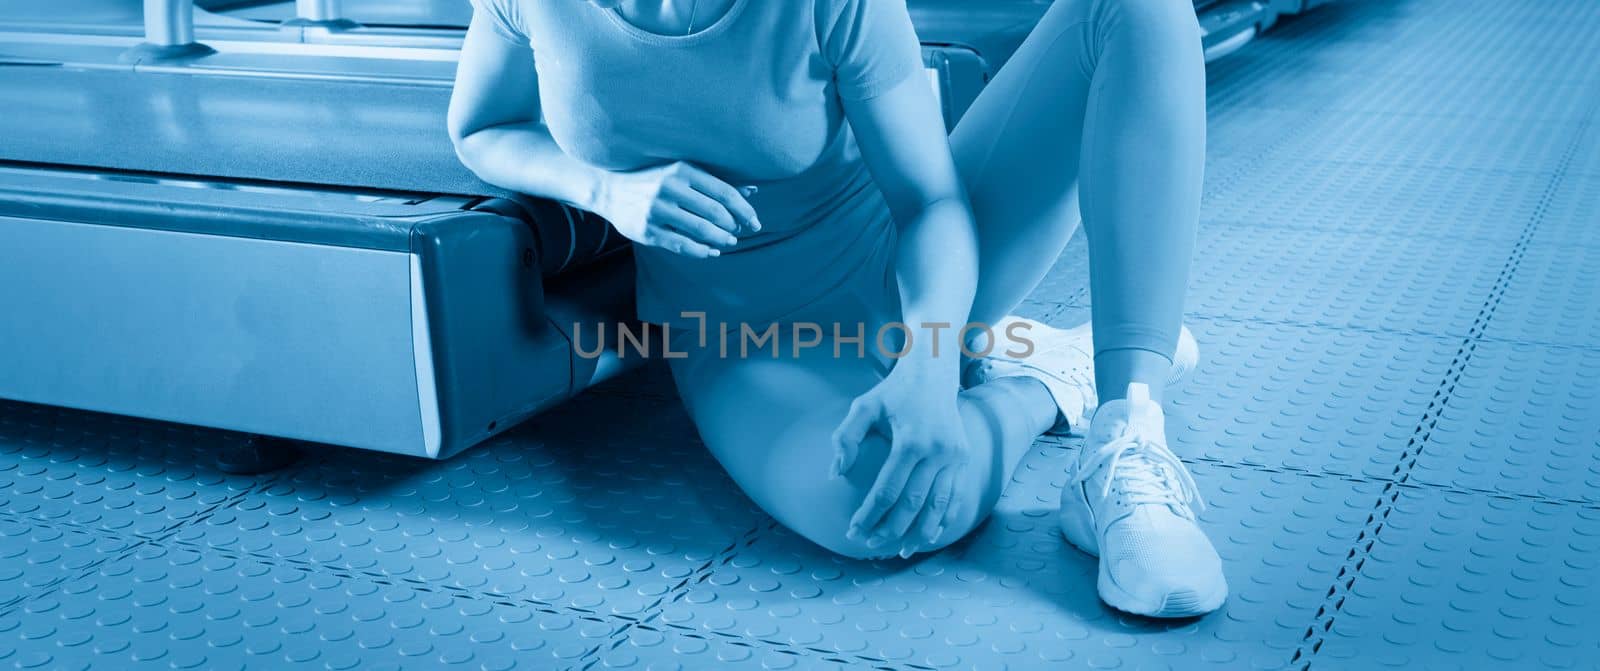 Young woman in sportswear having ache in knee while training in a gym, red spot showing pain